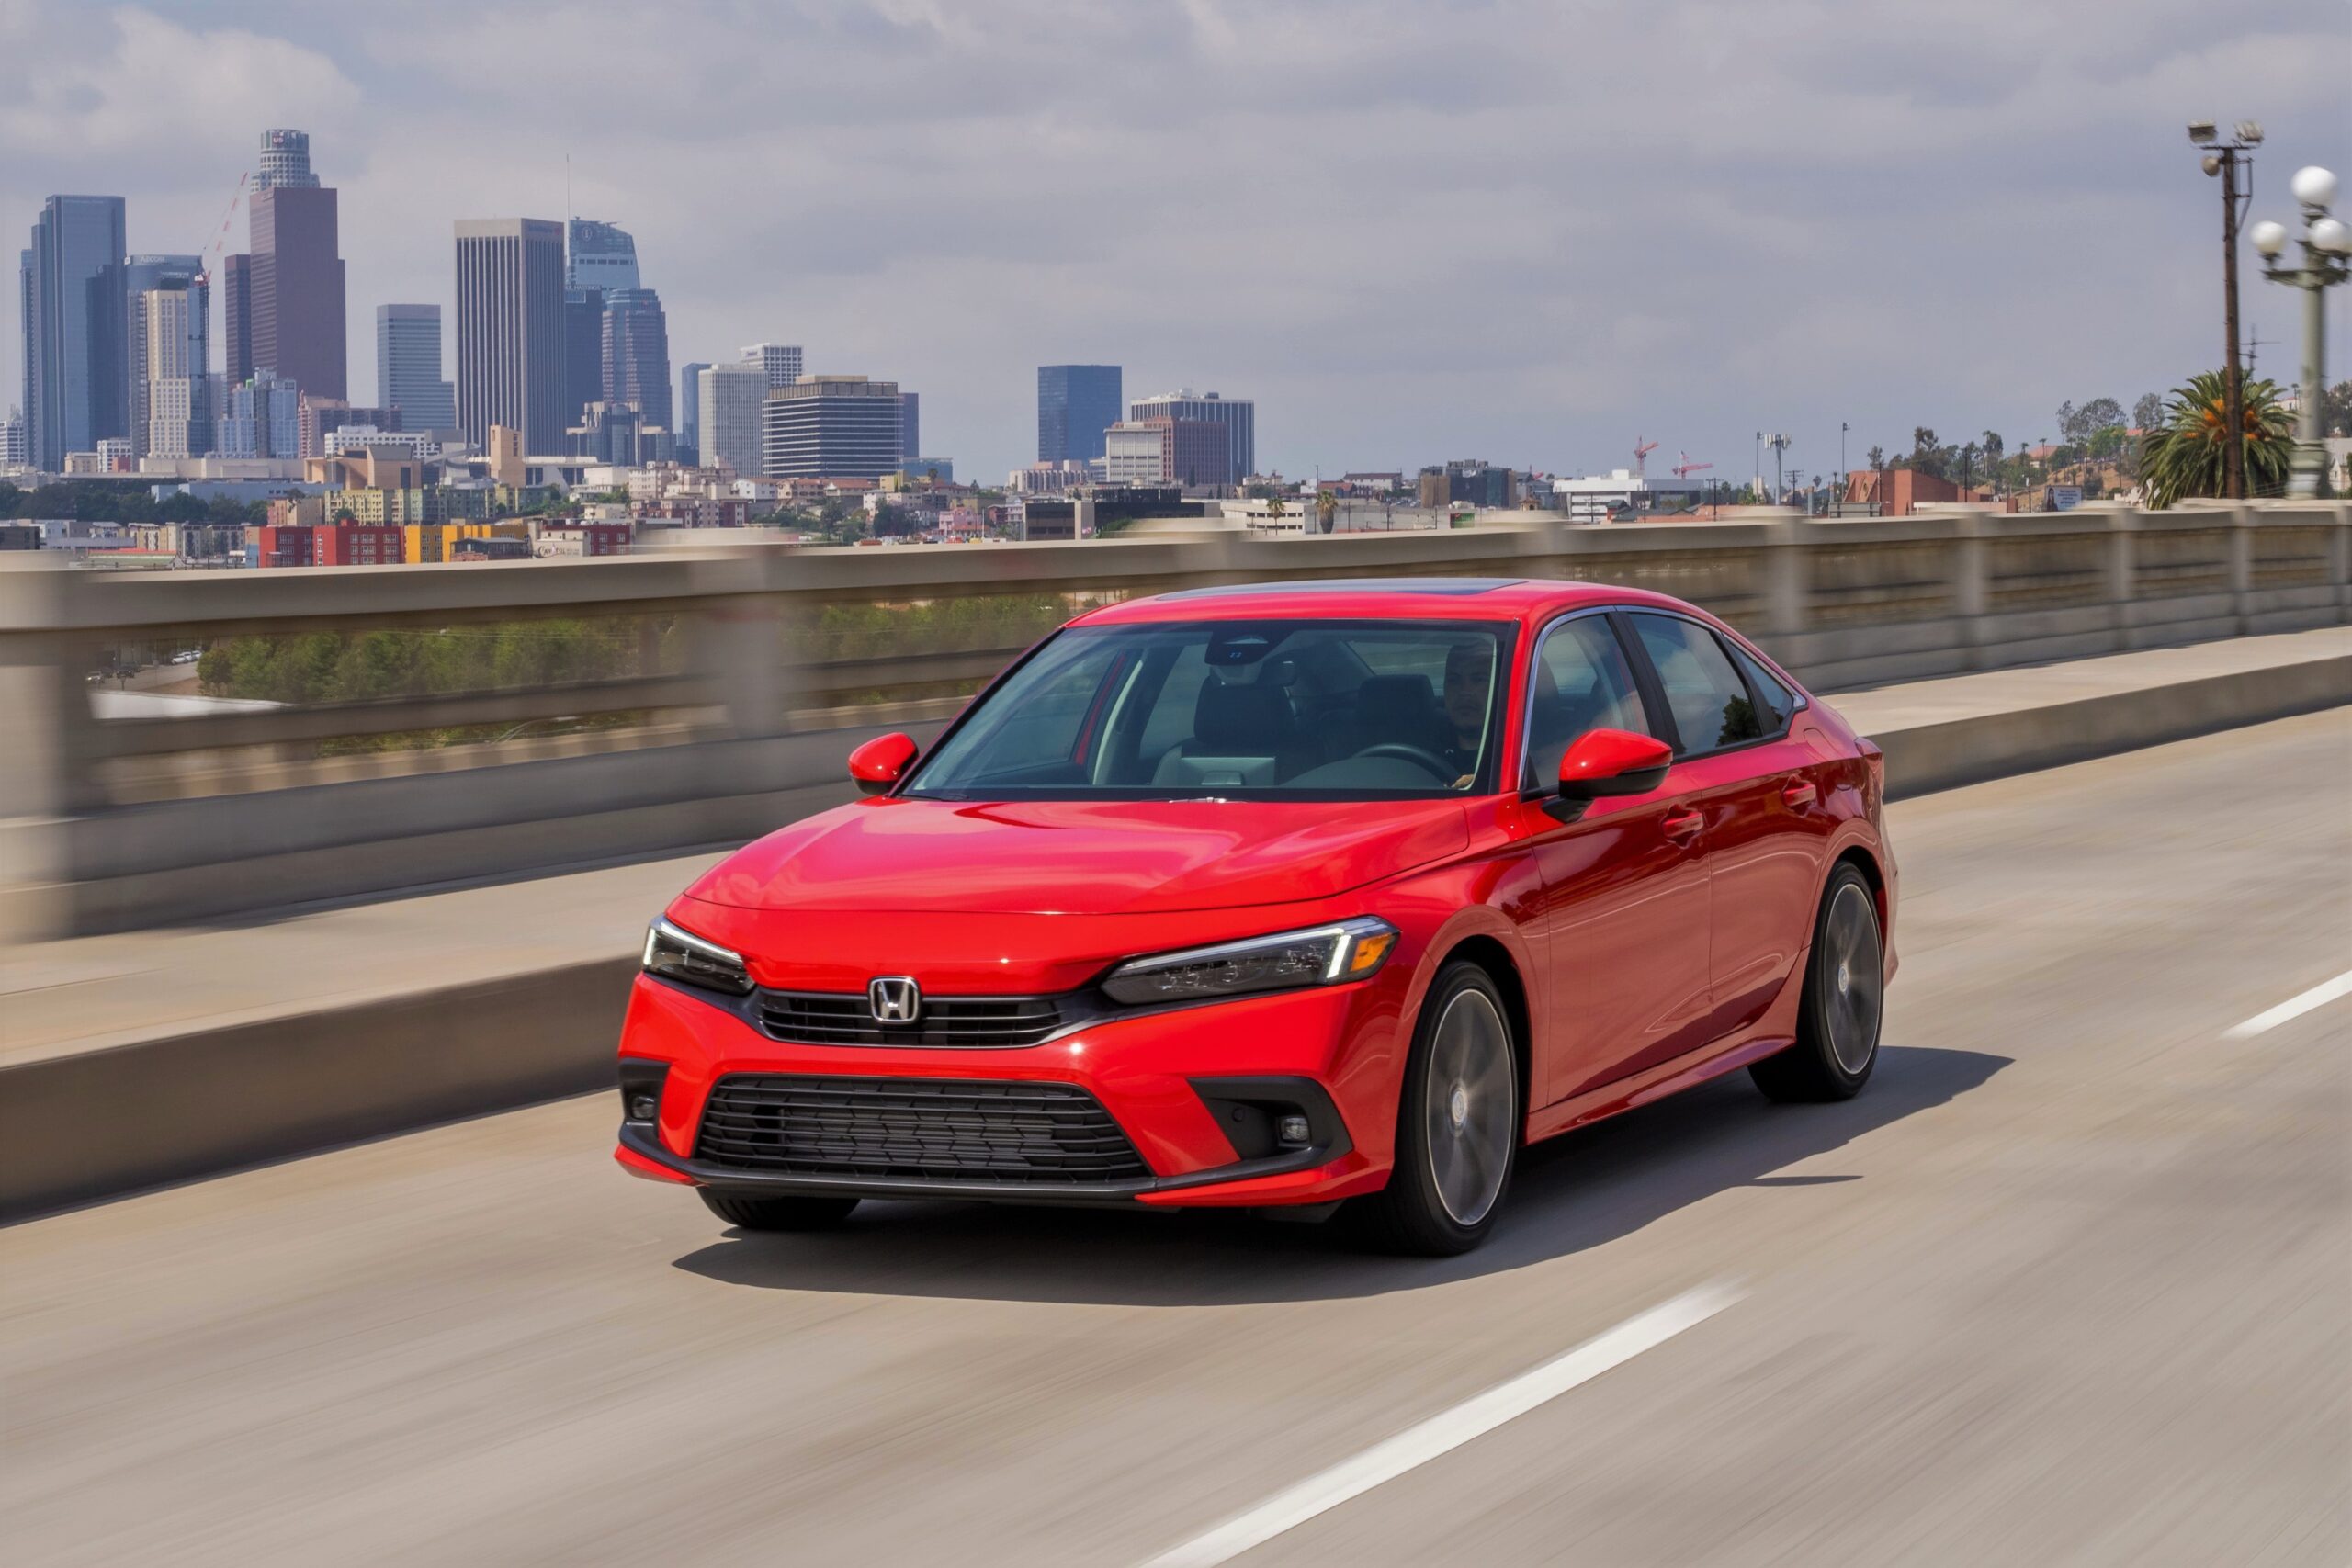 2023 Honda Civic Drops Cheapest LX Base Model From Lineup, Now Starts at $25K+